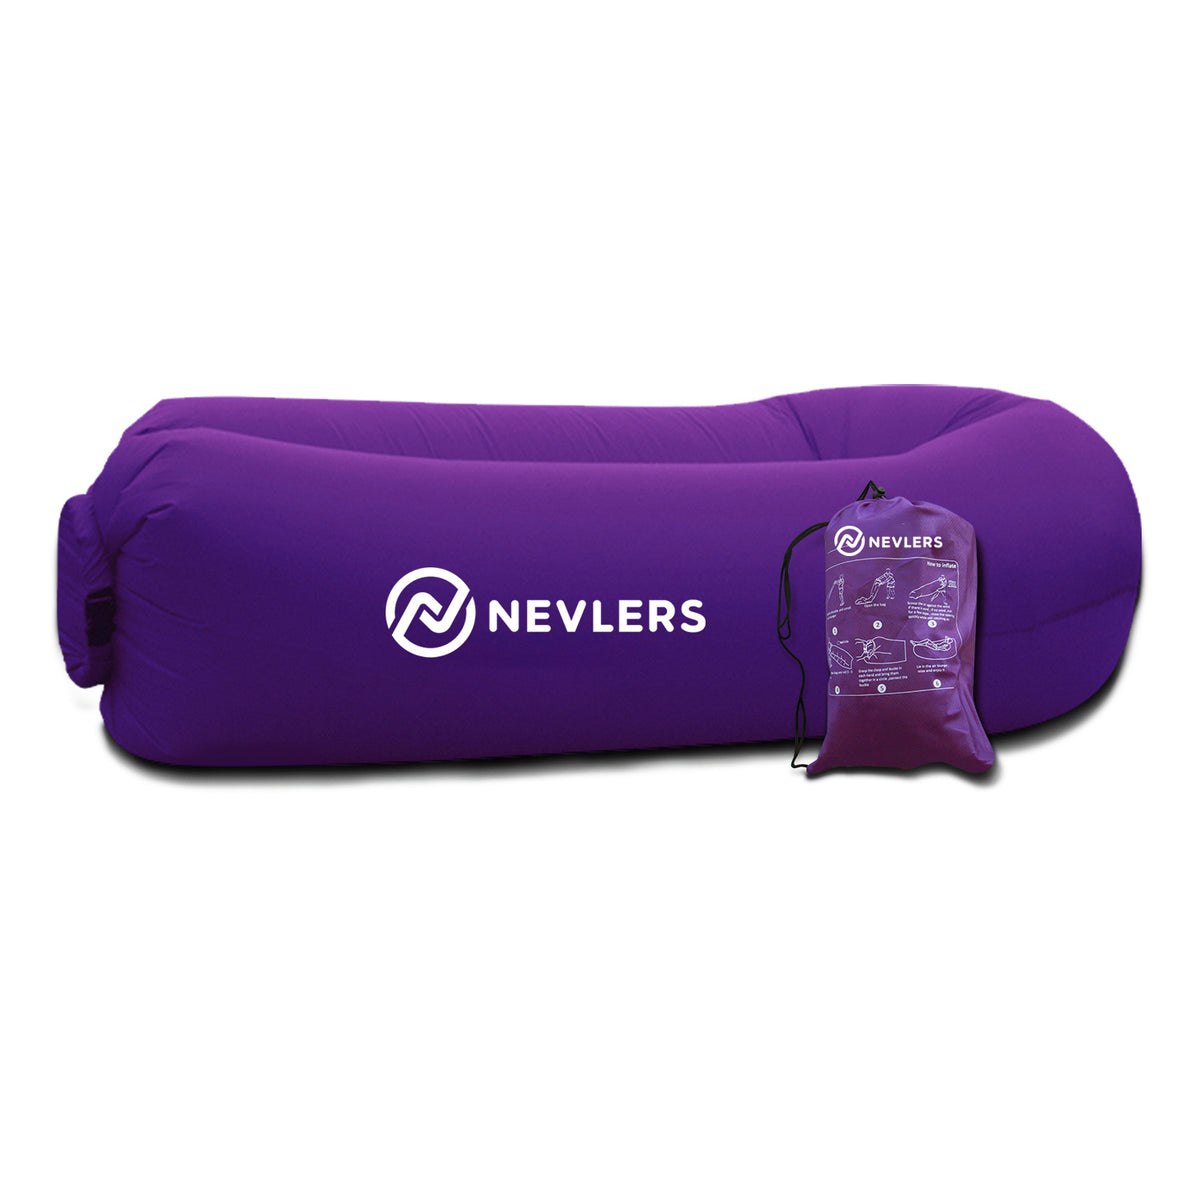 Inflatable Lounger - Purple - 1 Pack